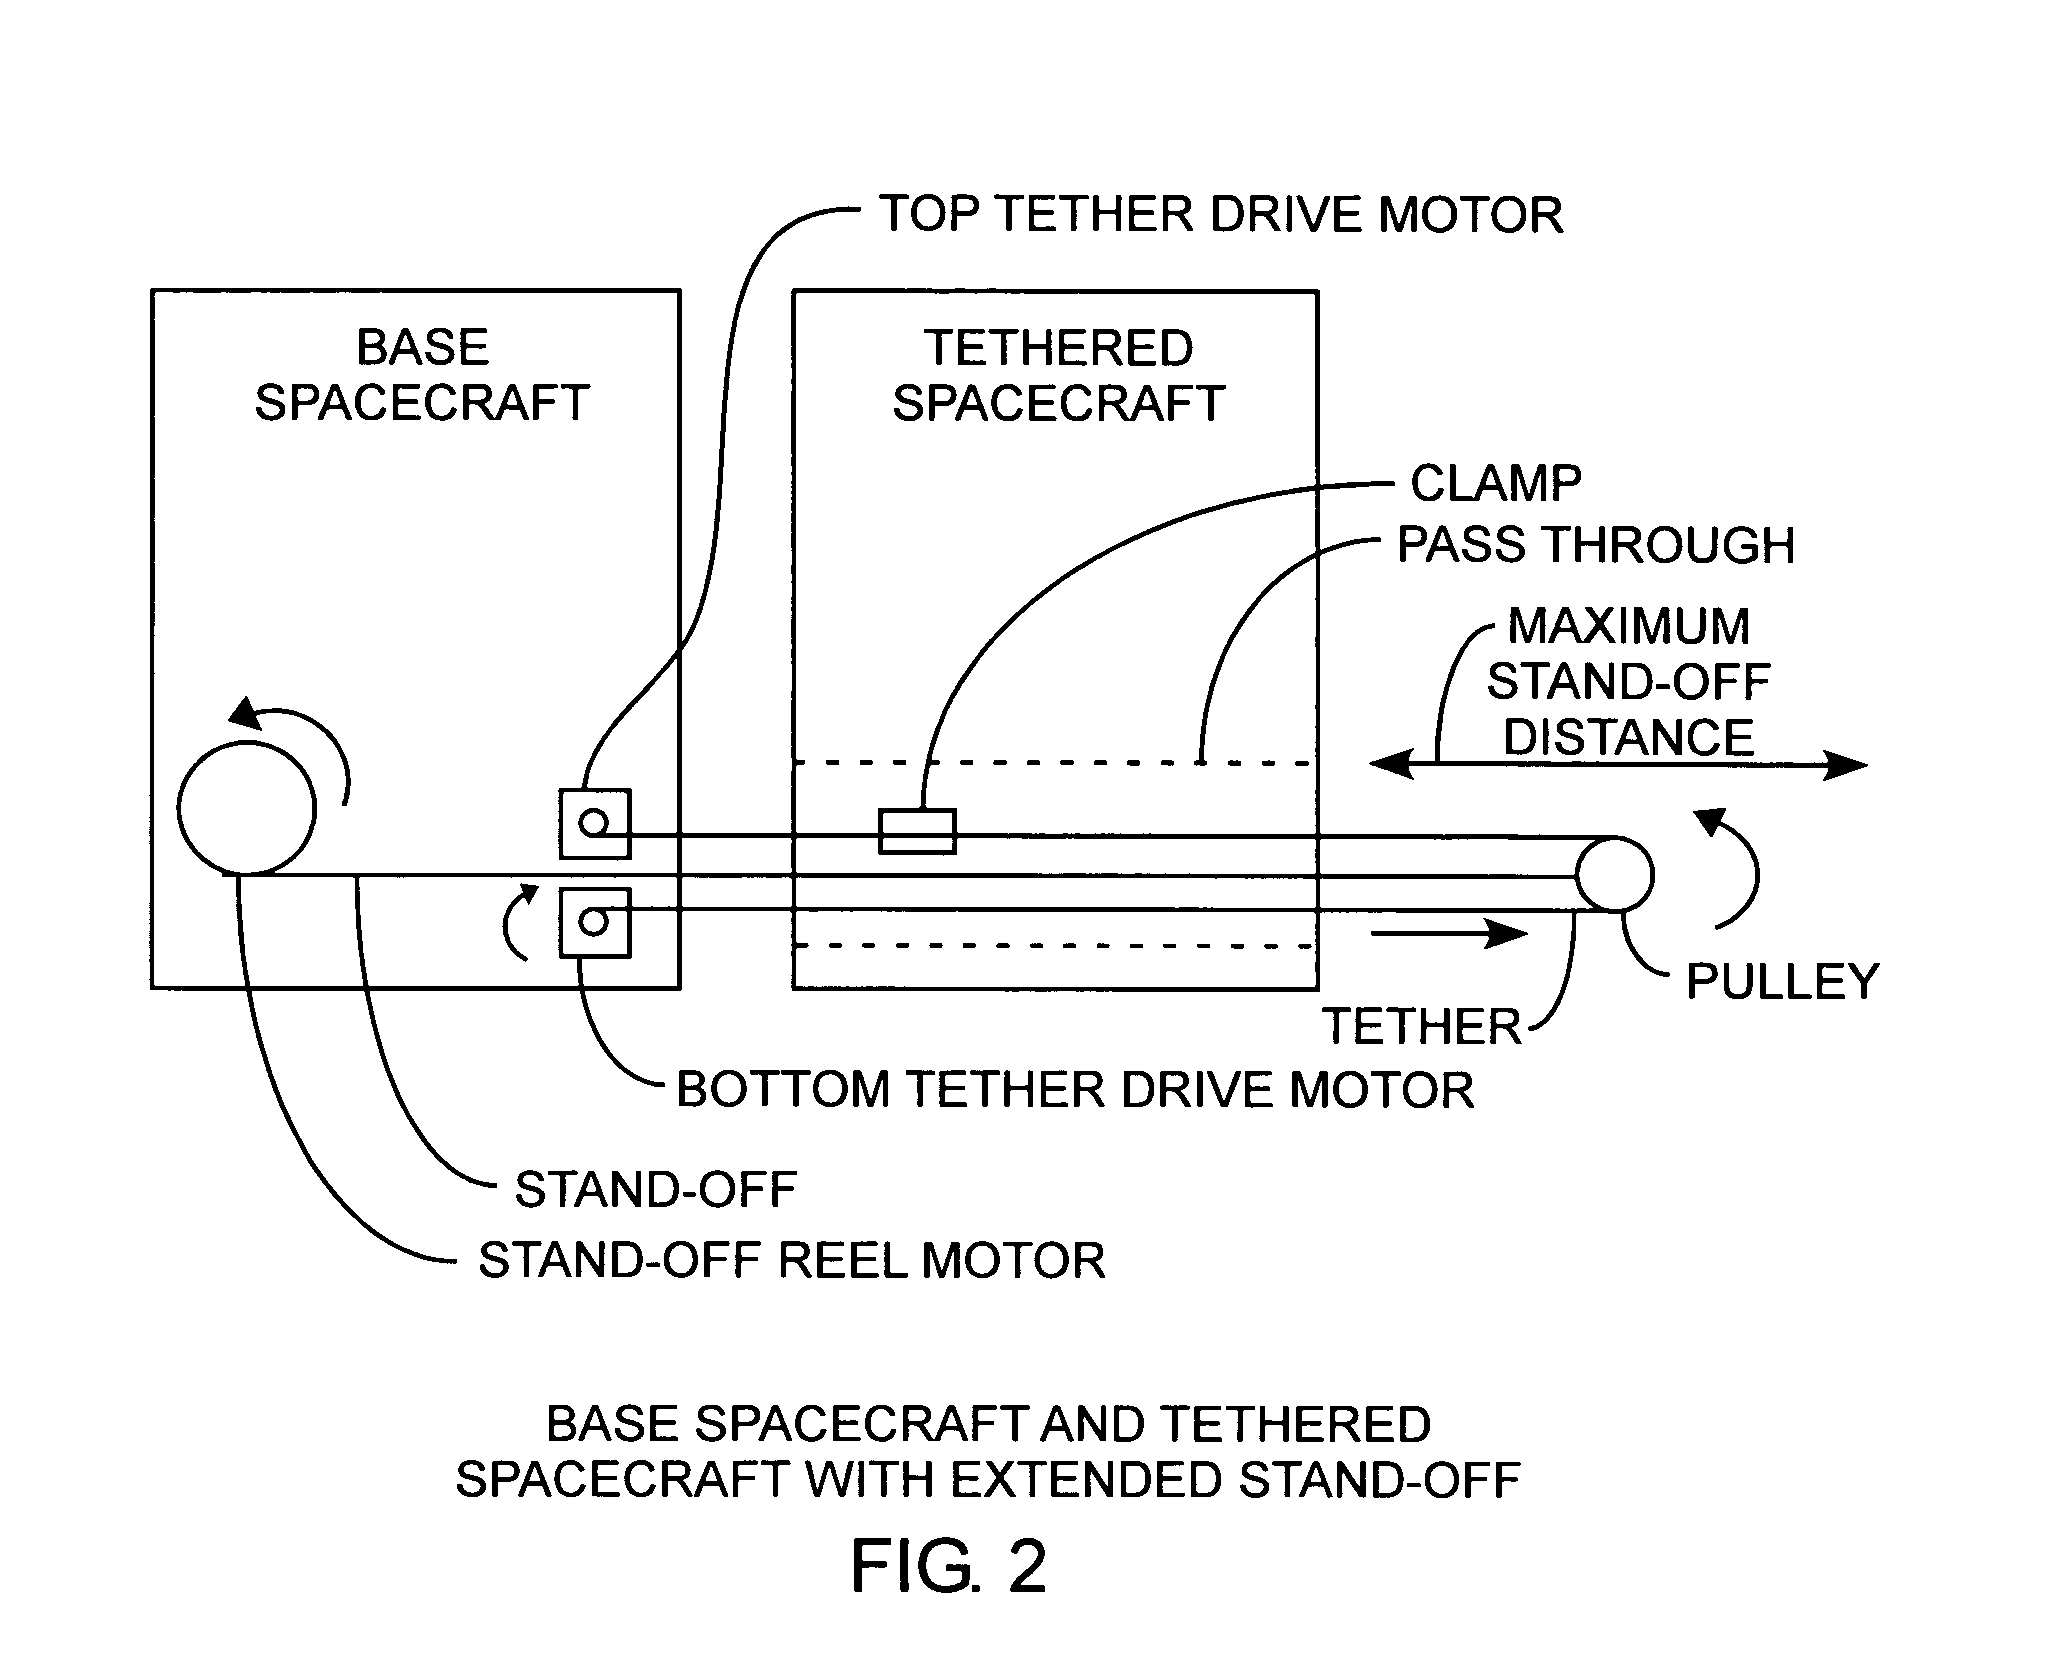 Satellite stand-off tether system